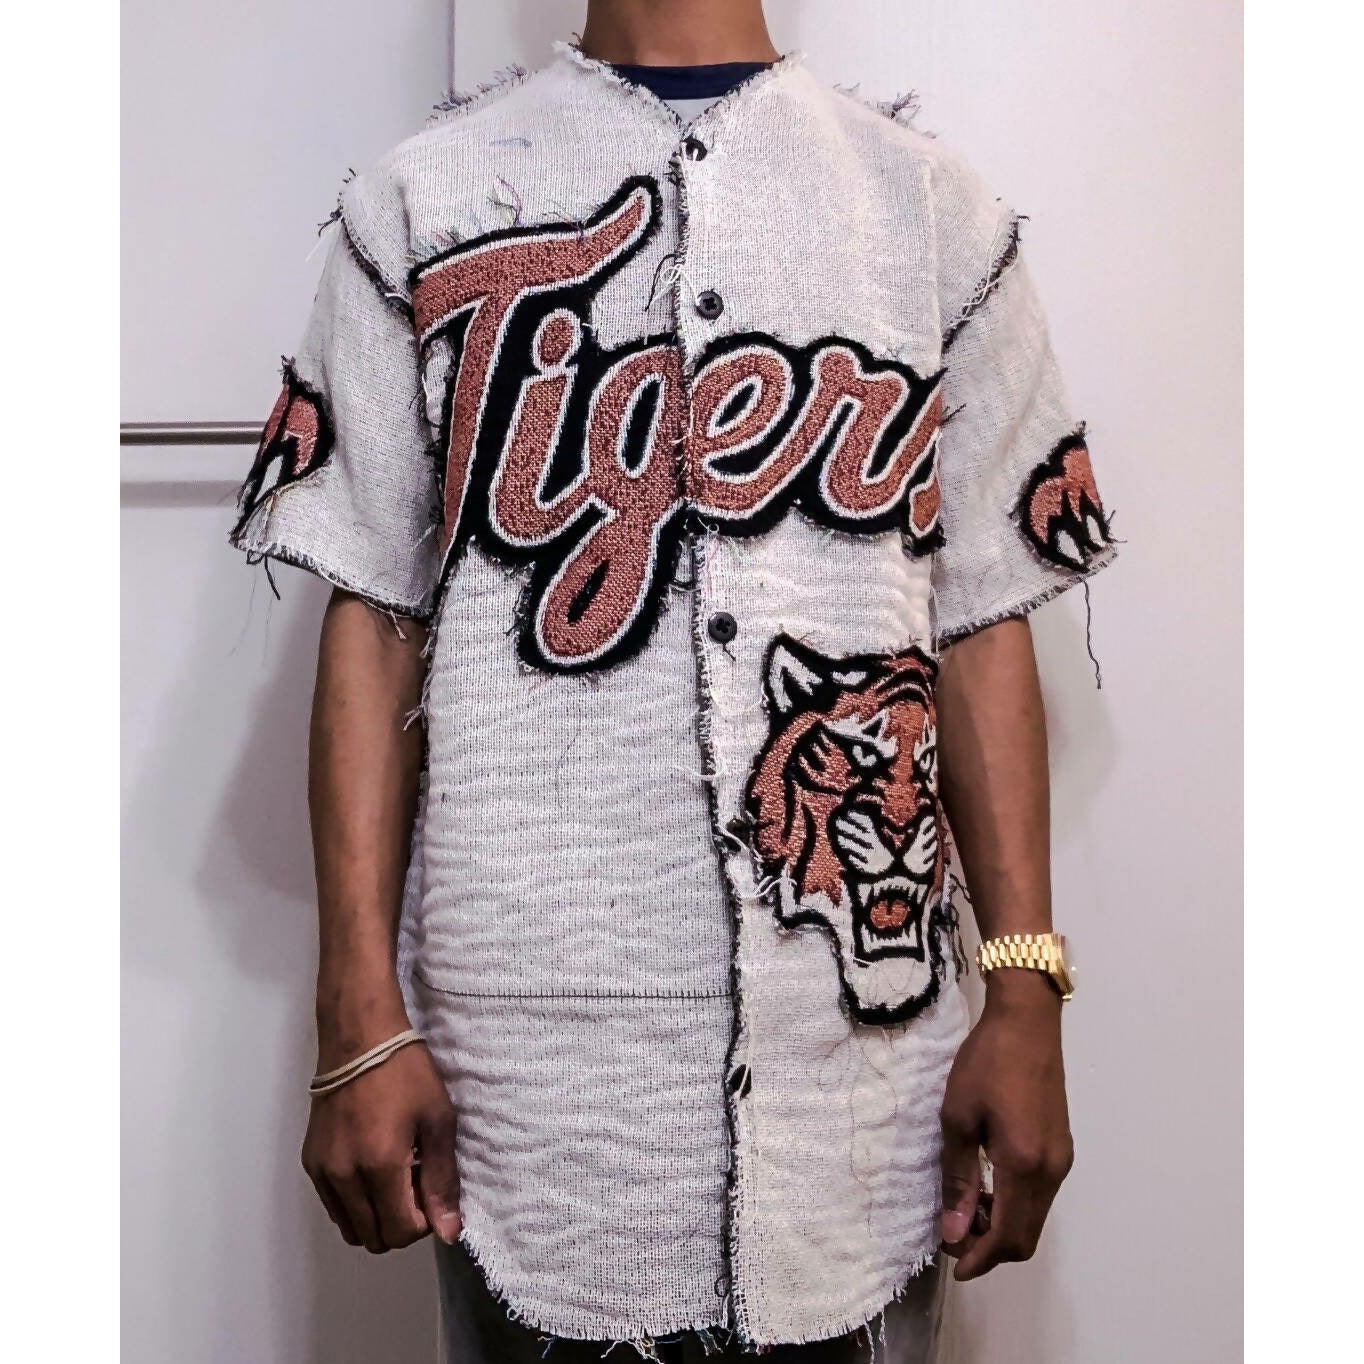 [MADE TO ORDER] "Delmar Jersey"